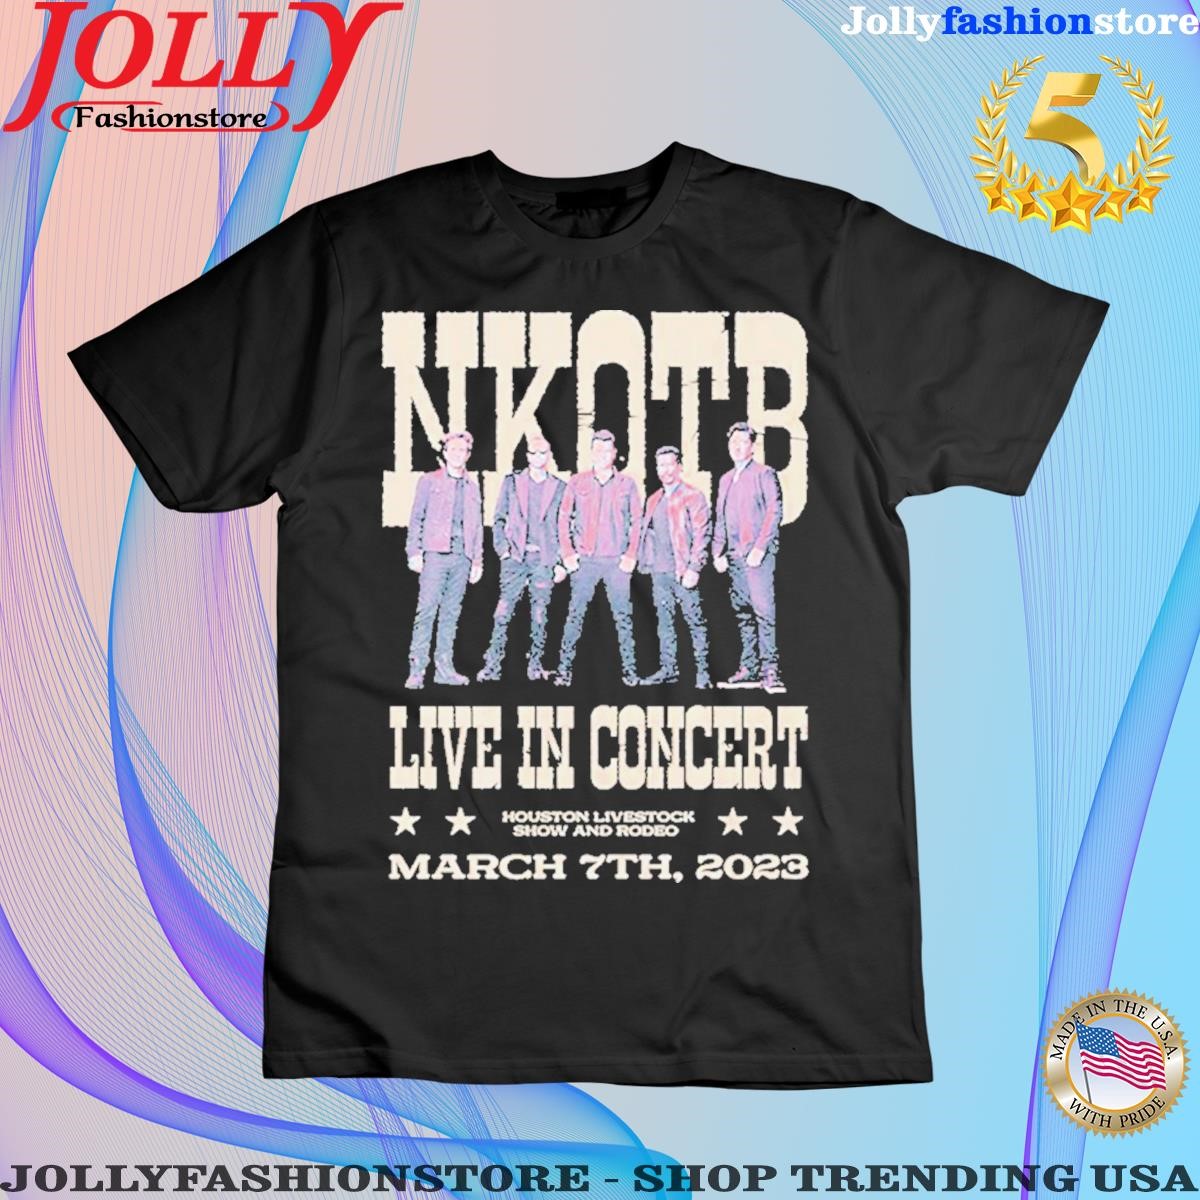 Nkotb live in concert houston livestock show and rodeo march 7th 2023 shirt women tee shirt.png